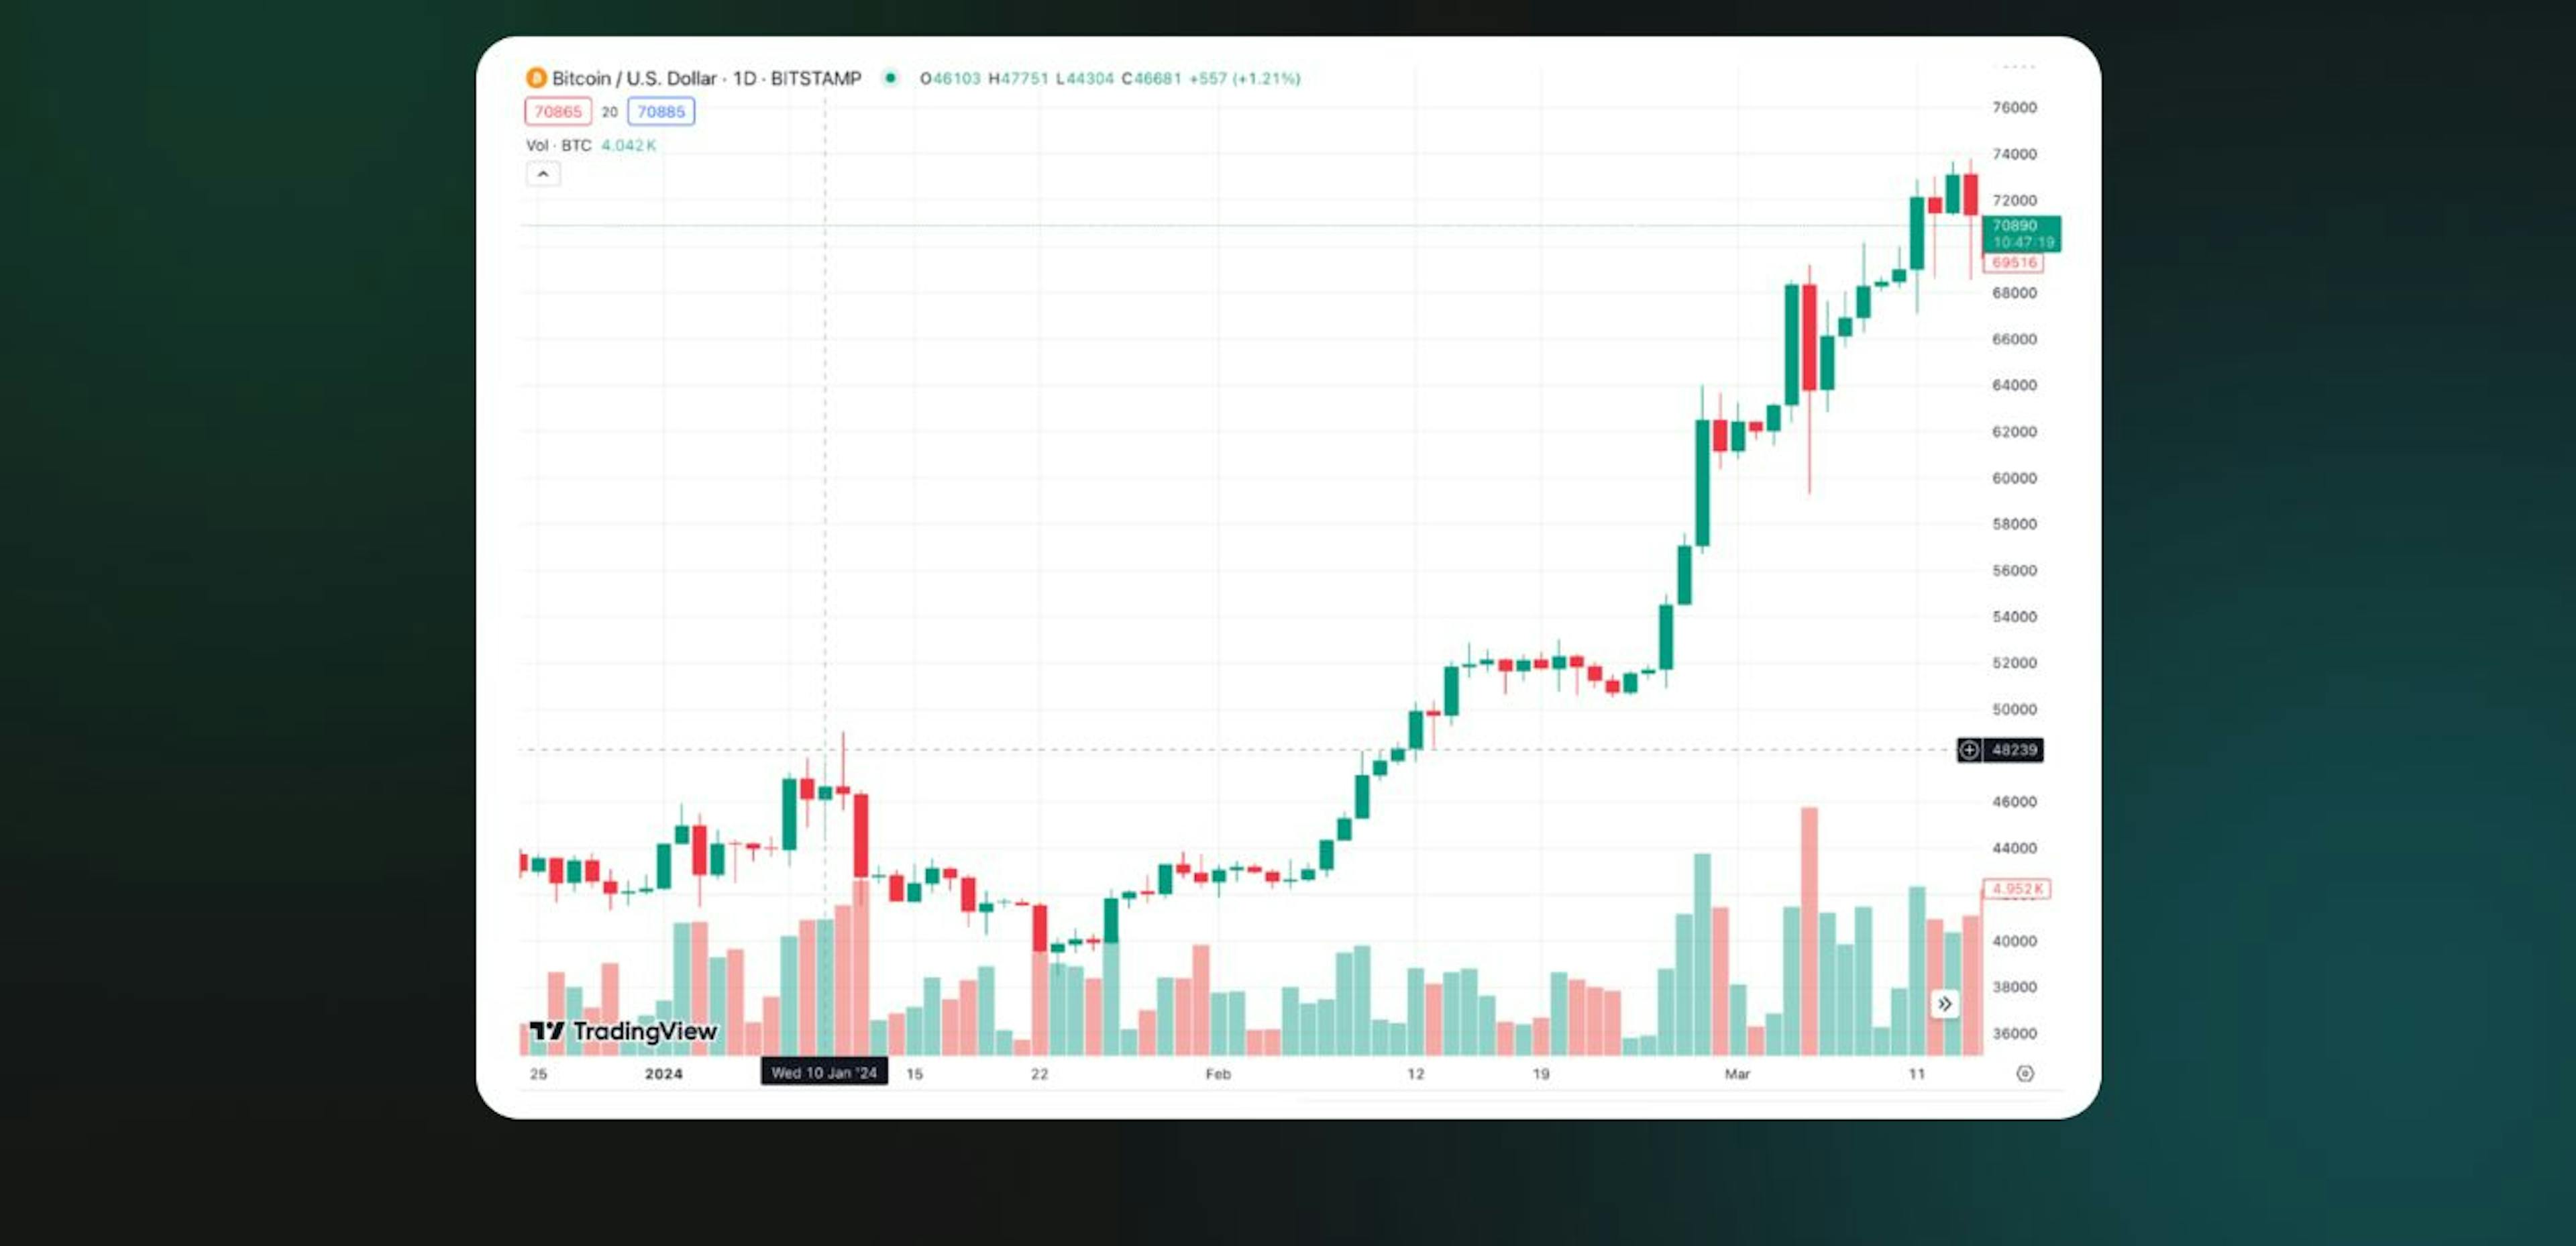 BTC/USD price chart showing the bitcoin ETF approval period and bitcoin hitting an all-time high. Source: TradingView